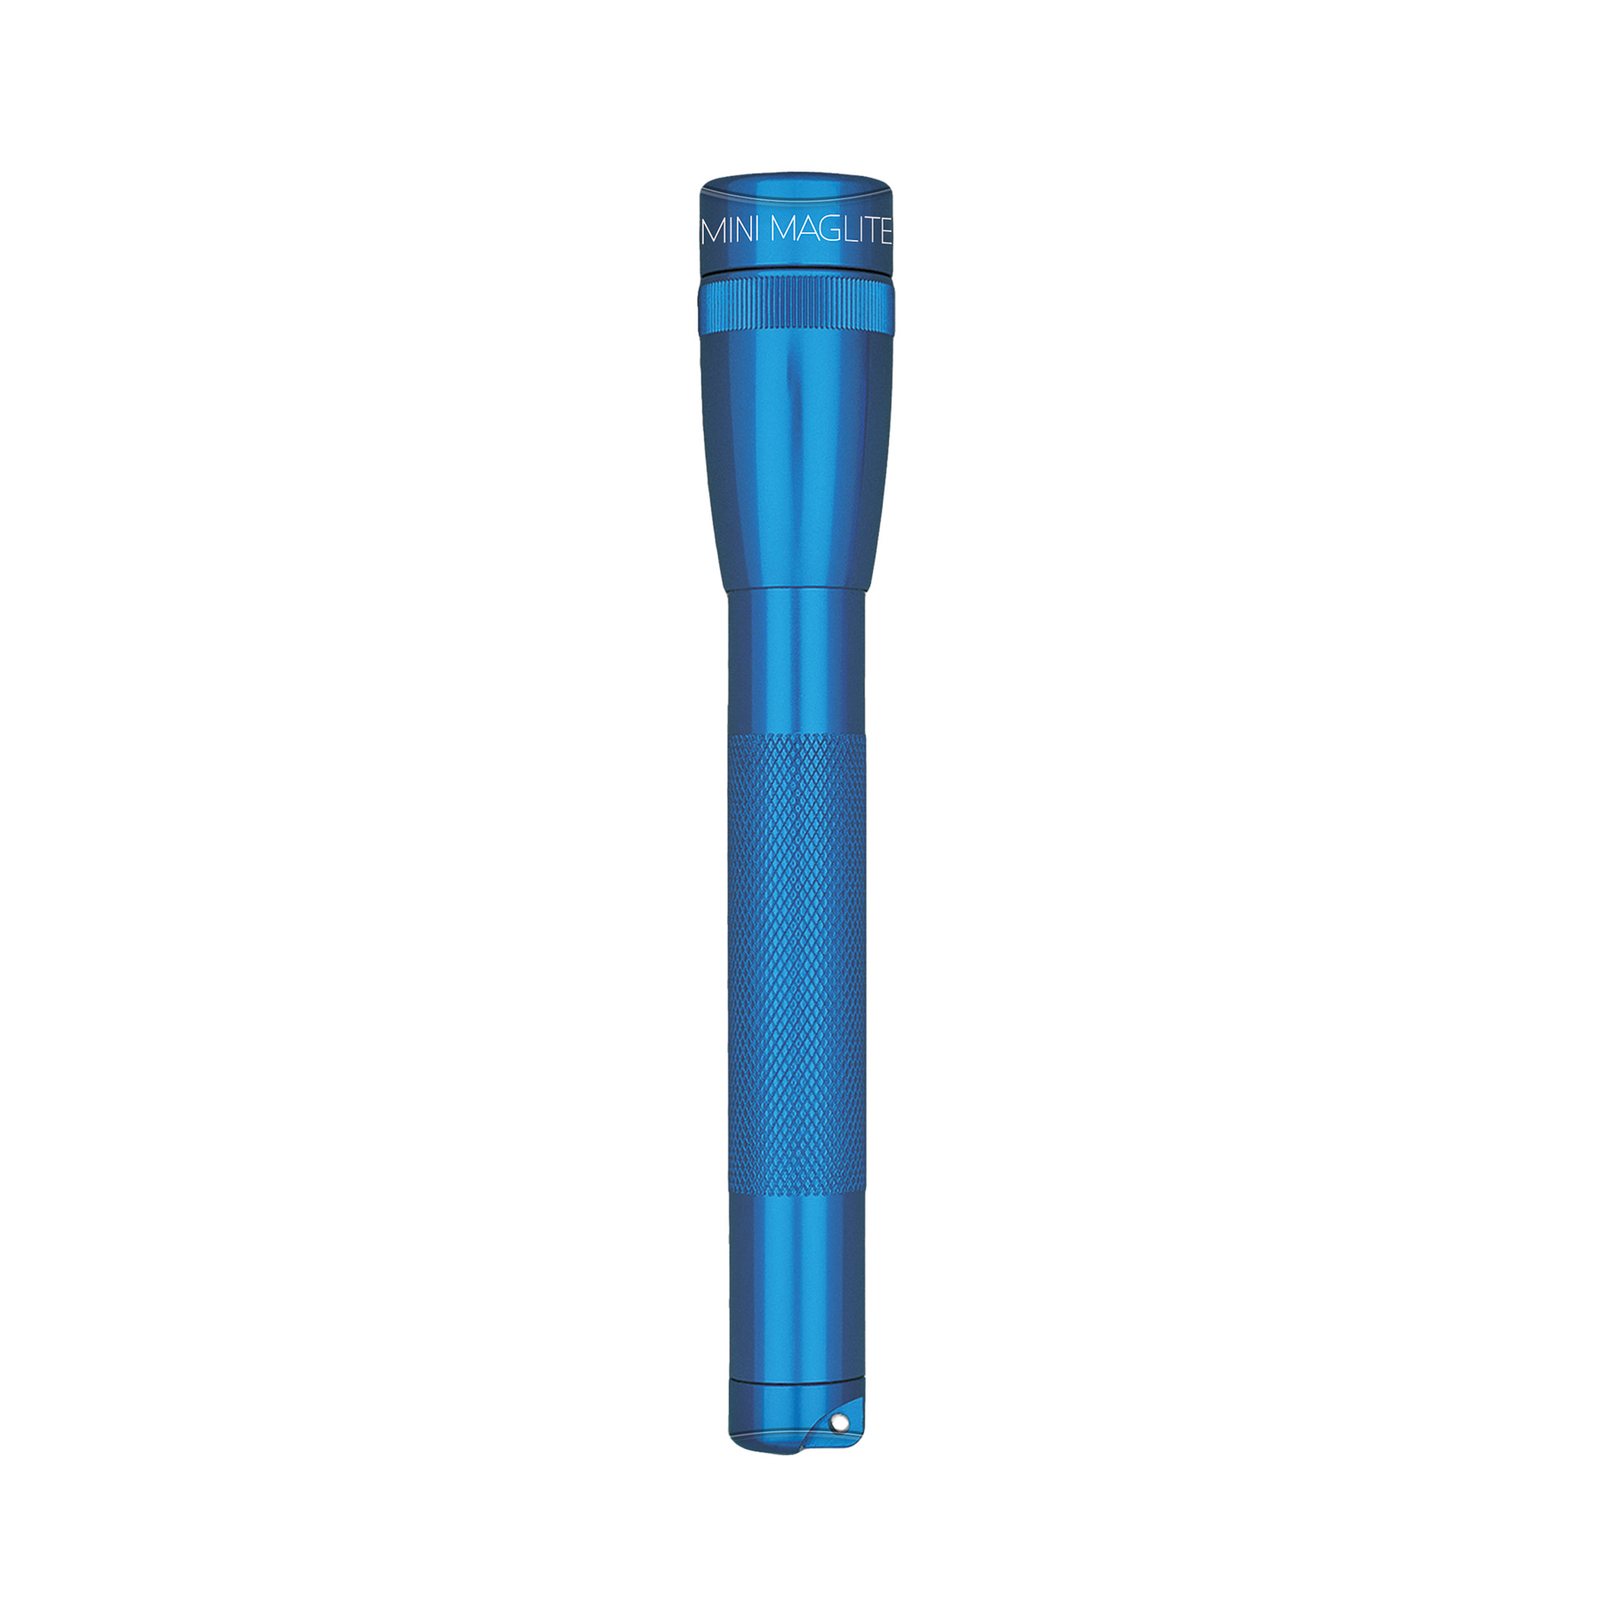 Maglite LED torch Mini, 2-Cell AA, holster, blue